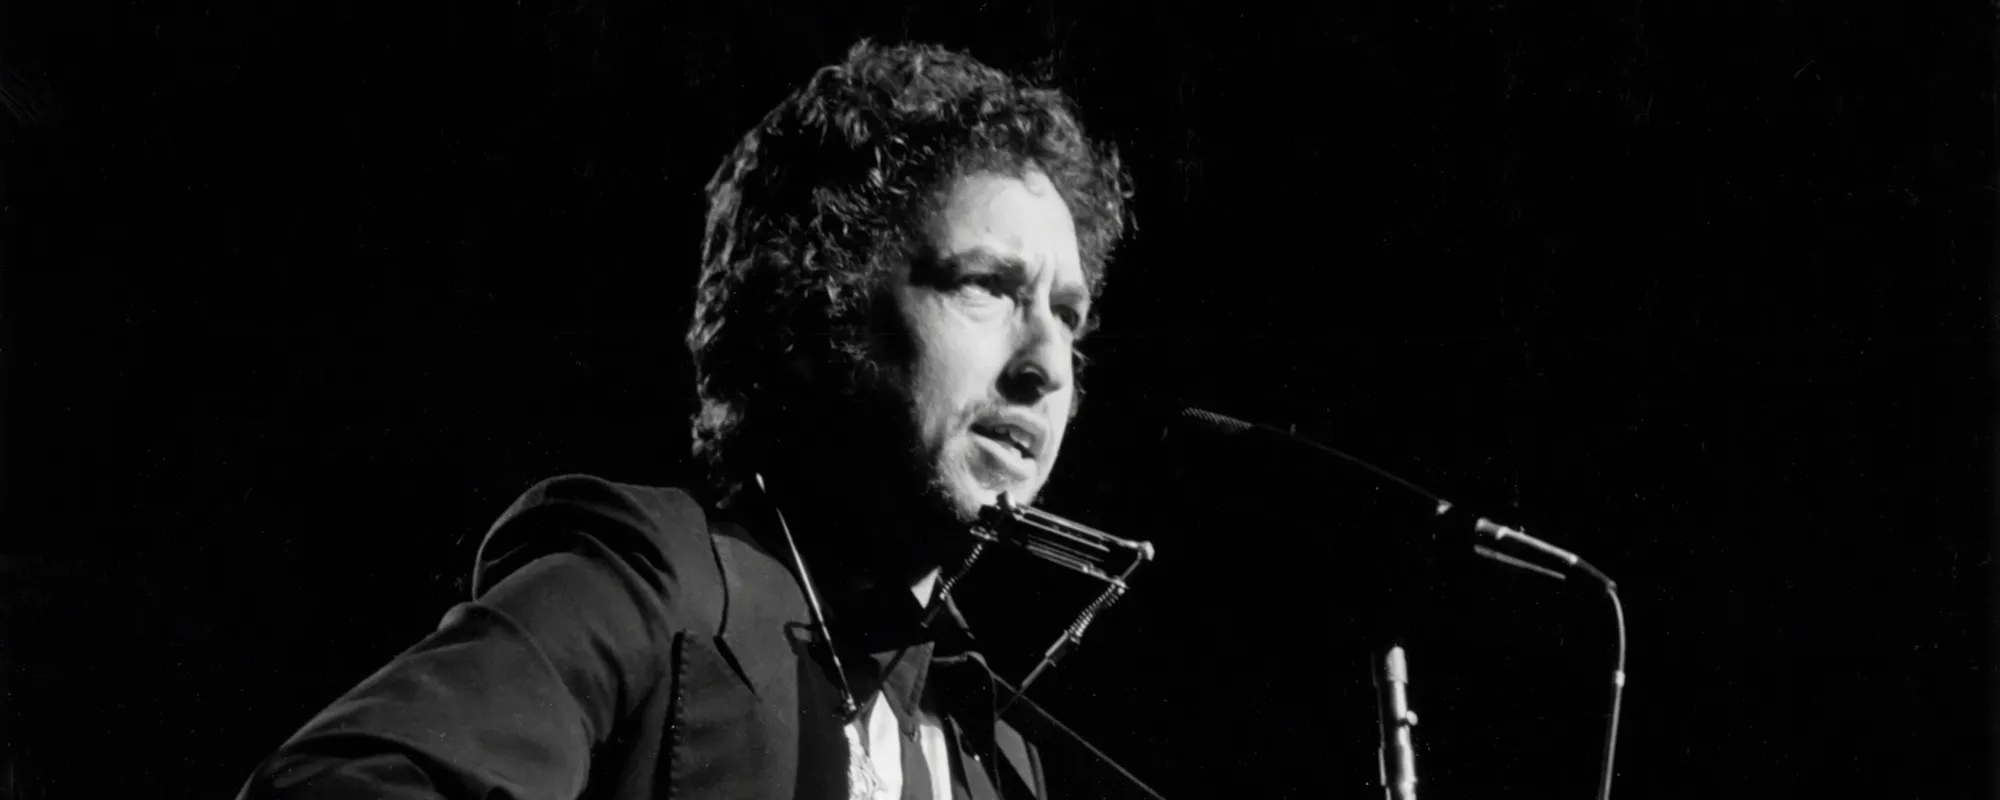 Top 10 Covers of Bob Dylan Songs